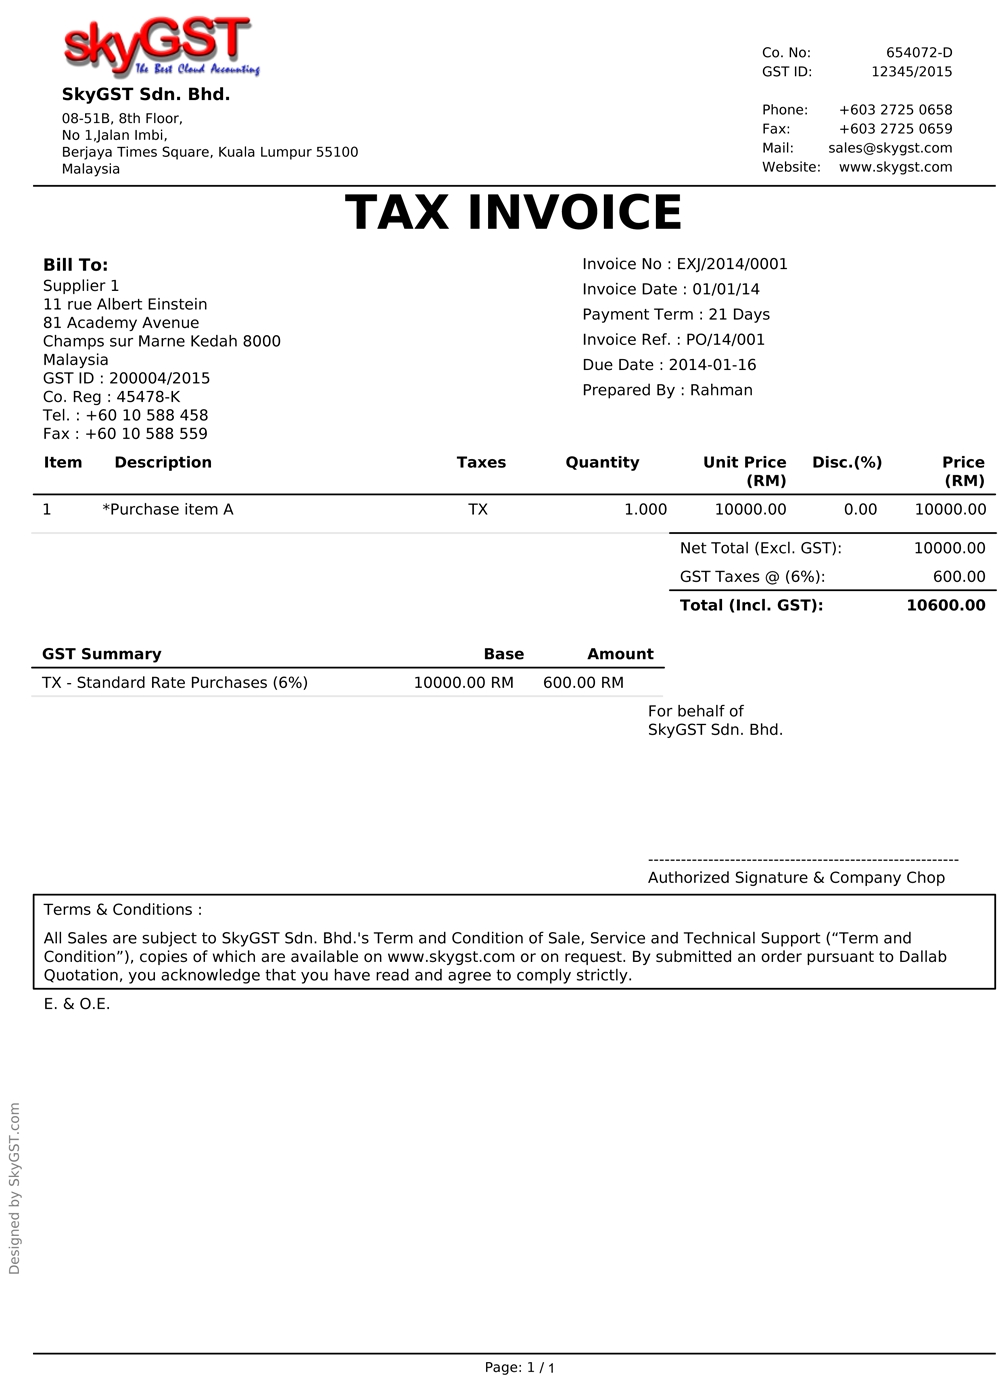 tax invoice example this tax invoice ok or not 1000 X 1392